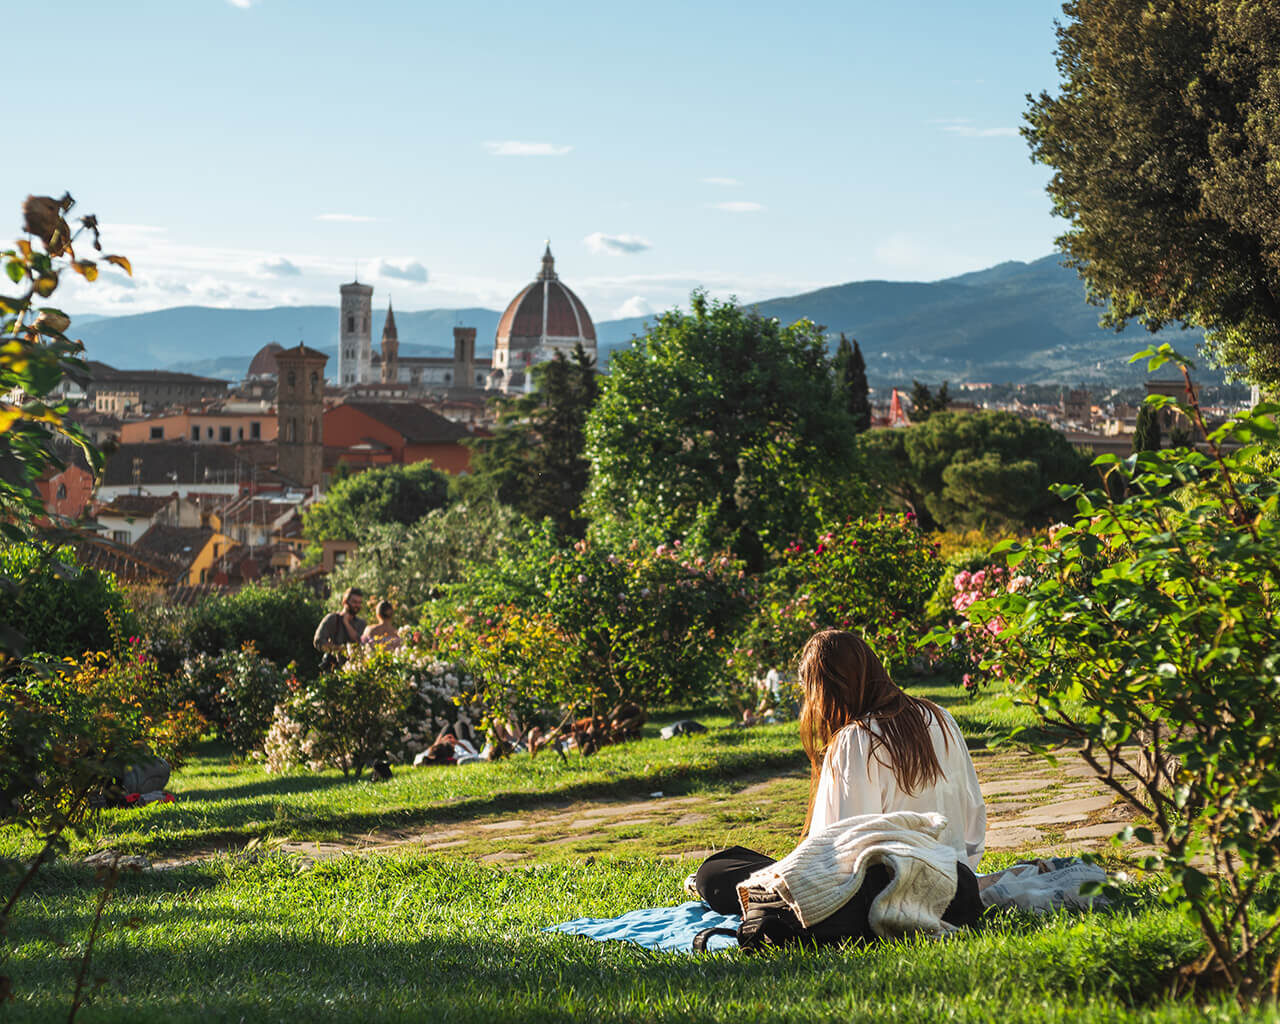 The weather in Florence in May is usually pleasantly warm